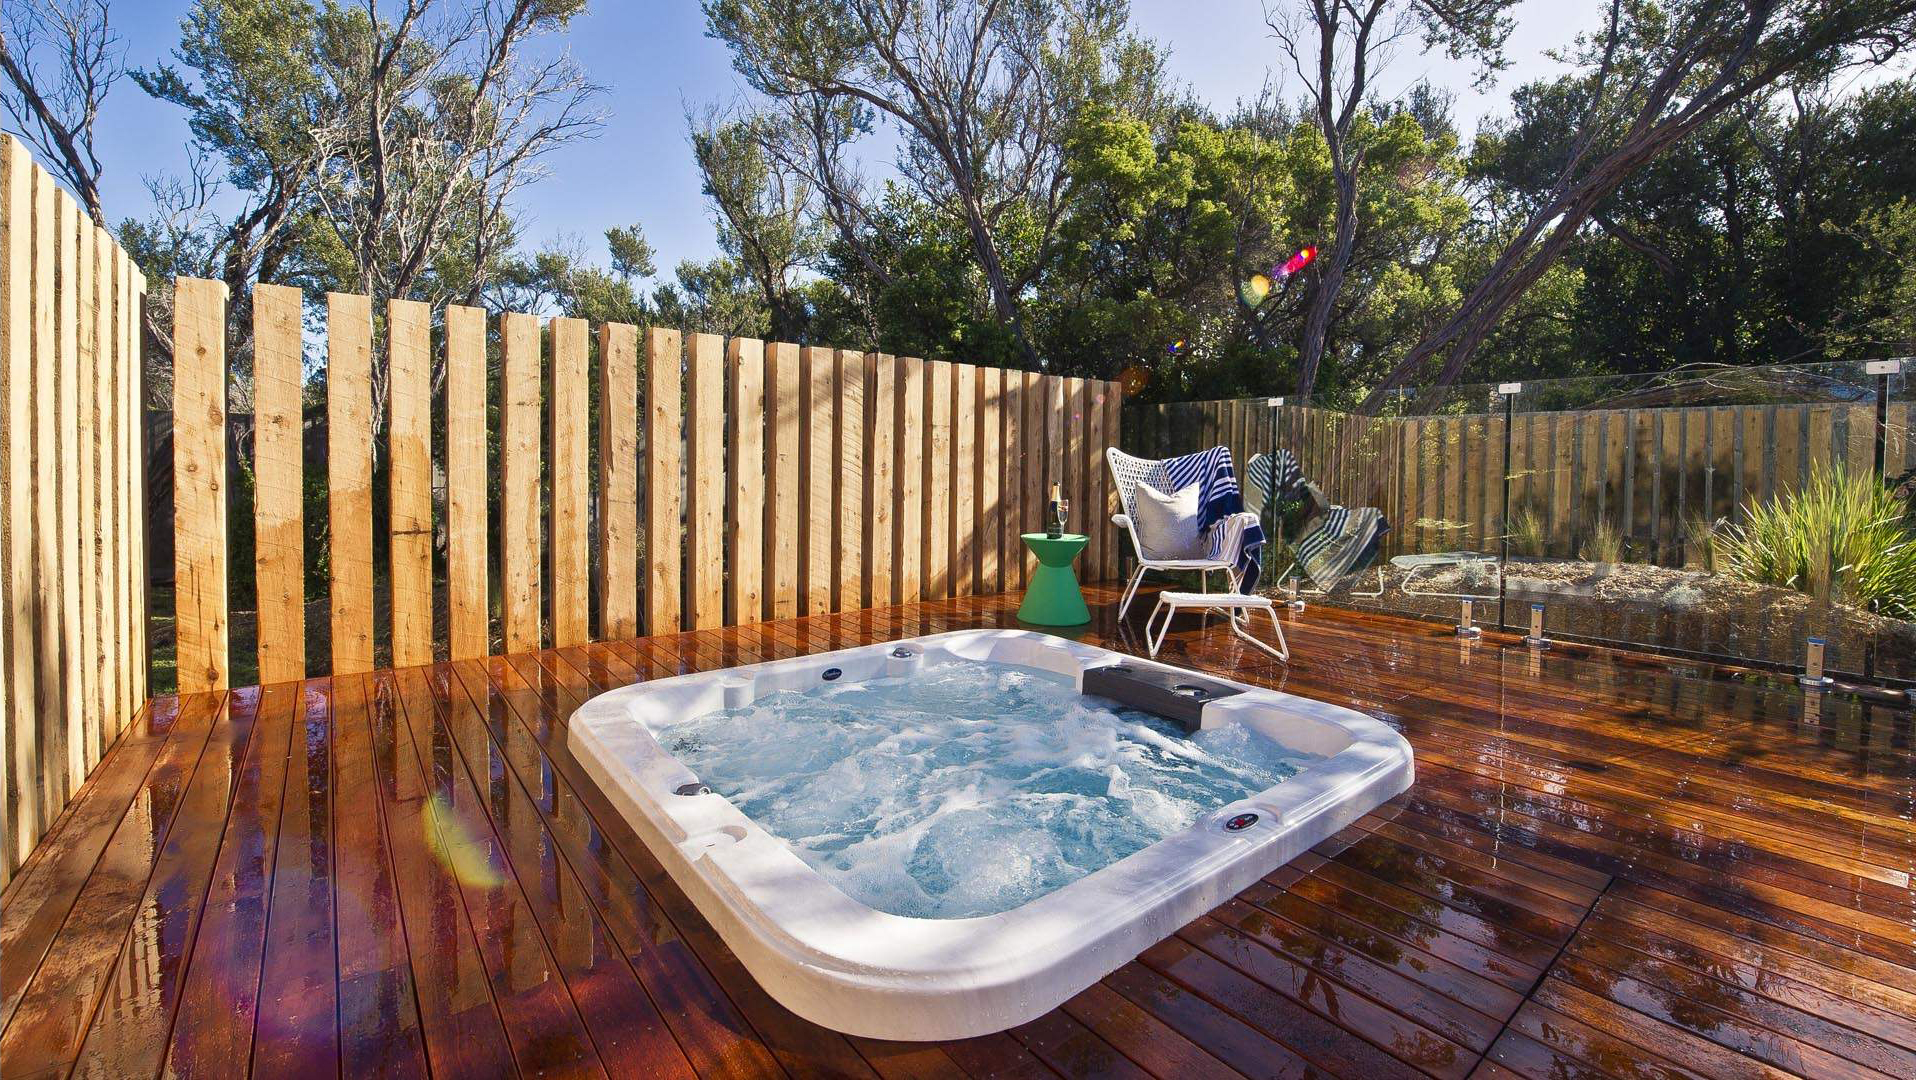 Backyard hot tub privacy ideas with fences